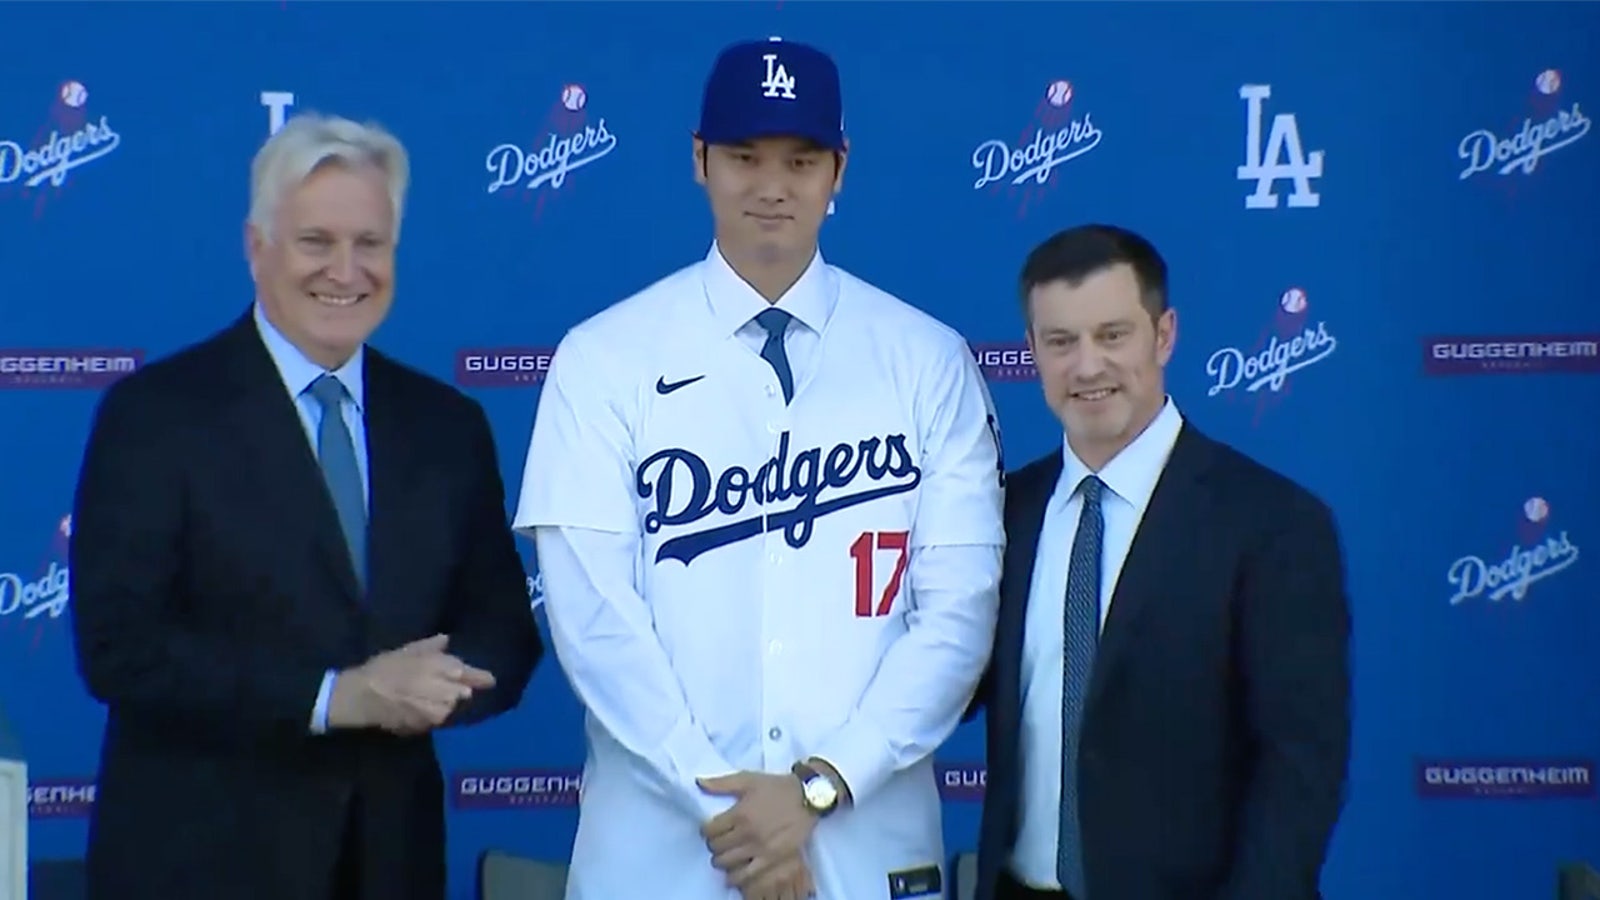 Shohei Ohtani puts on a Dodgers jersey for the first time at introductory news conference